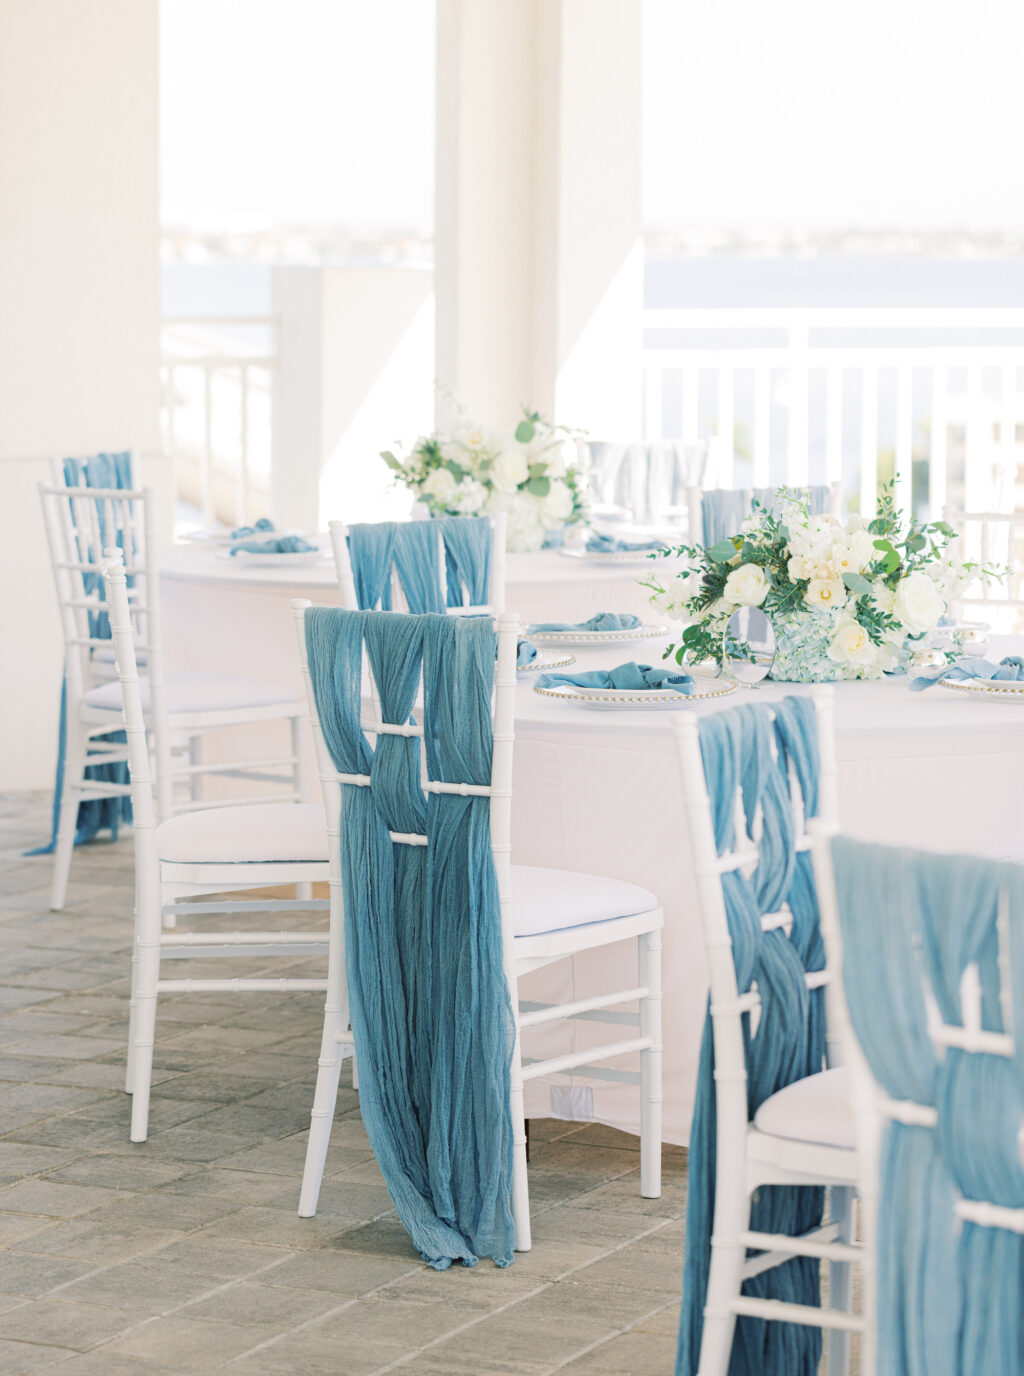 White Chairs with Blue Linen Back Detailing | Tampa Rentals Gabro Event Services